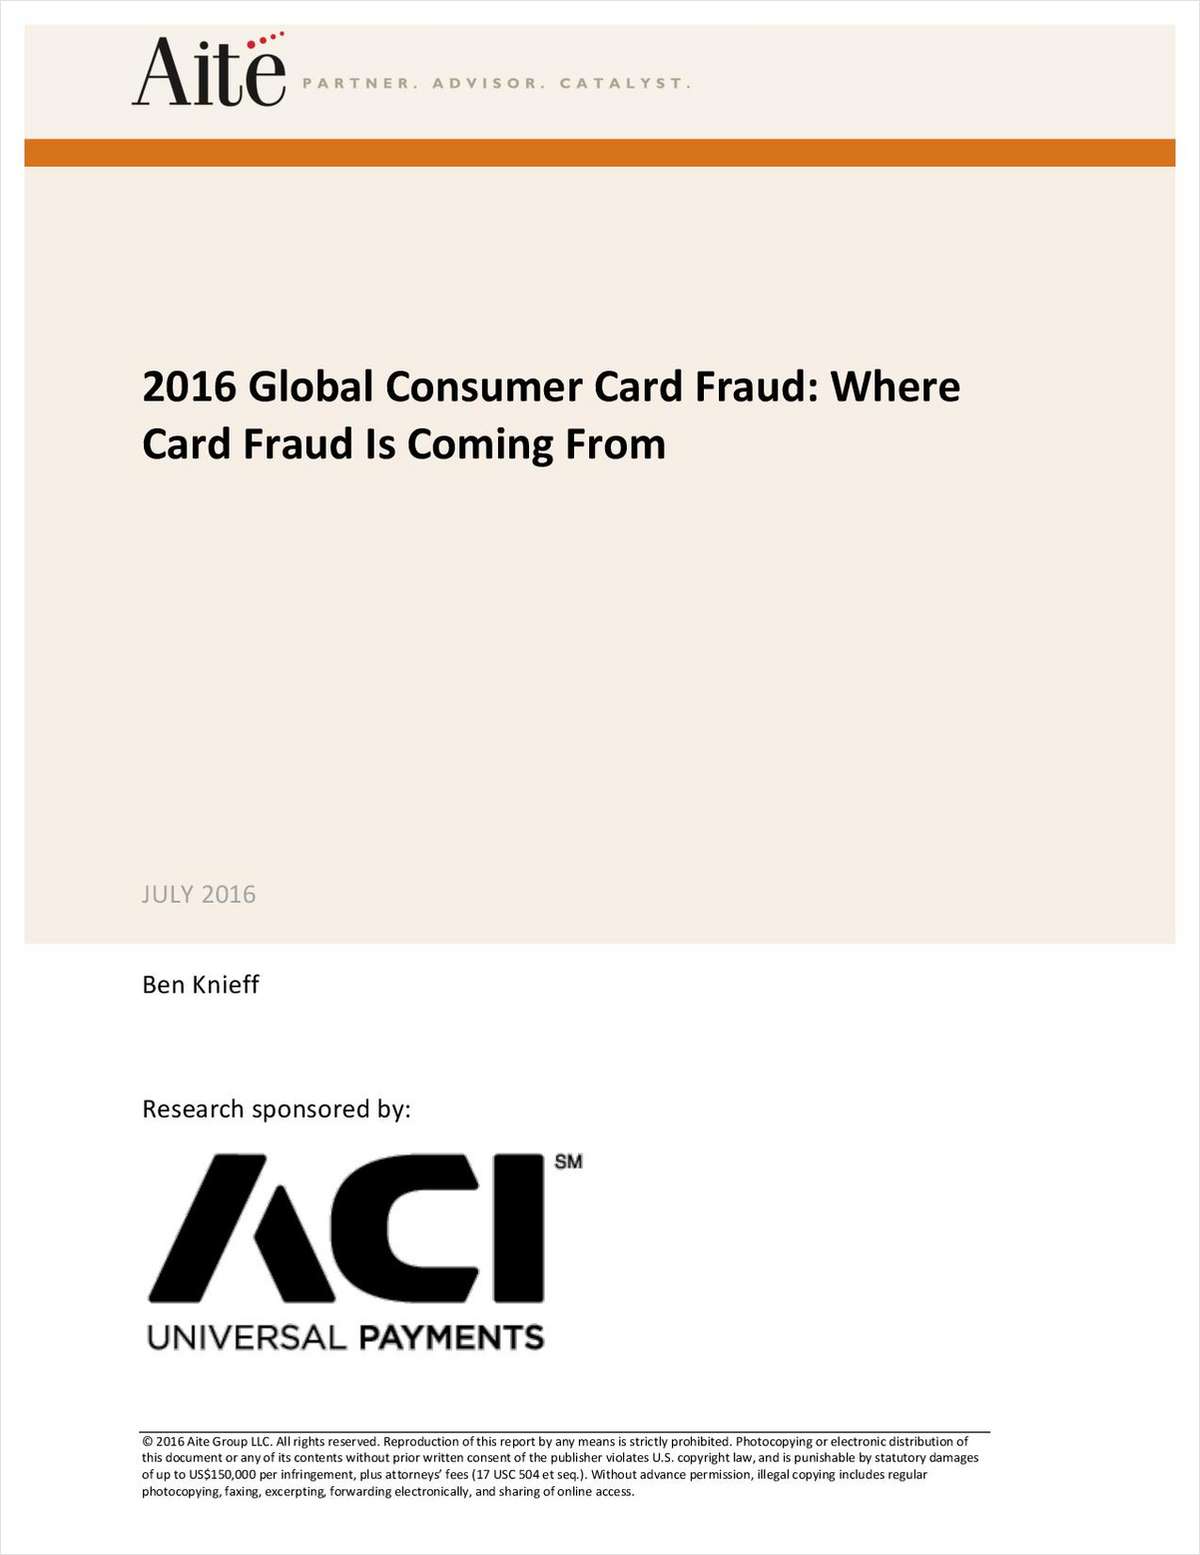 Fraud Survey finds Rising Card Fraud and Eroding Consumer Trust